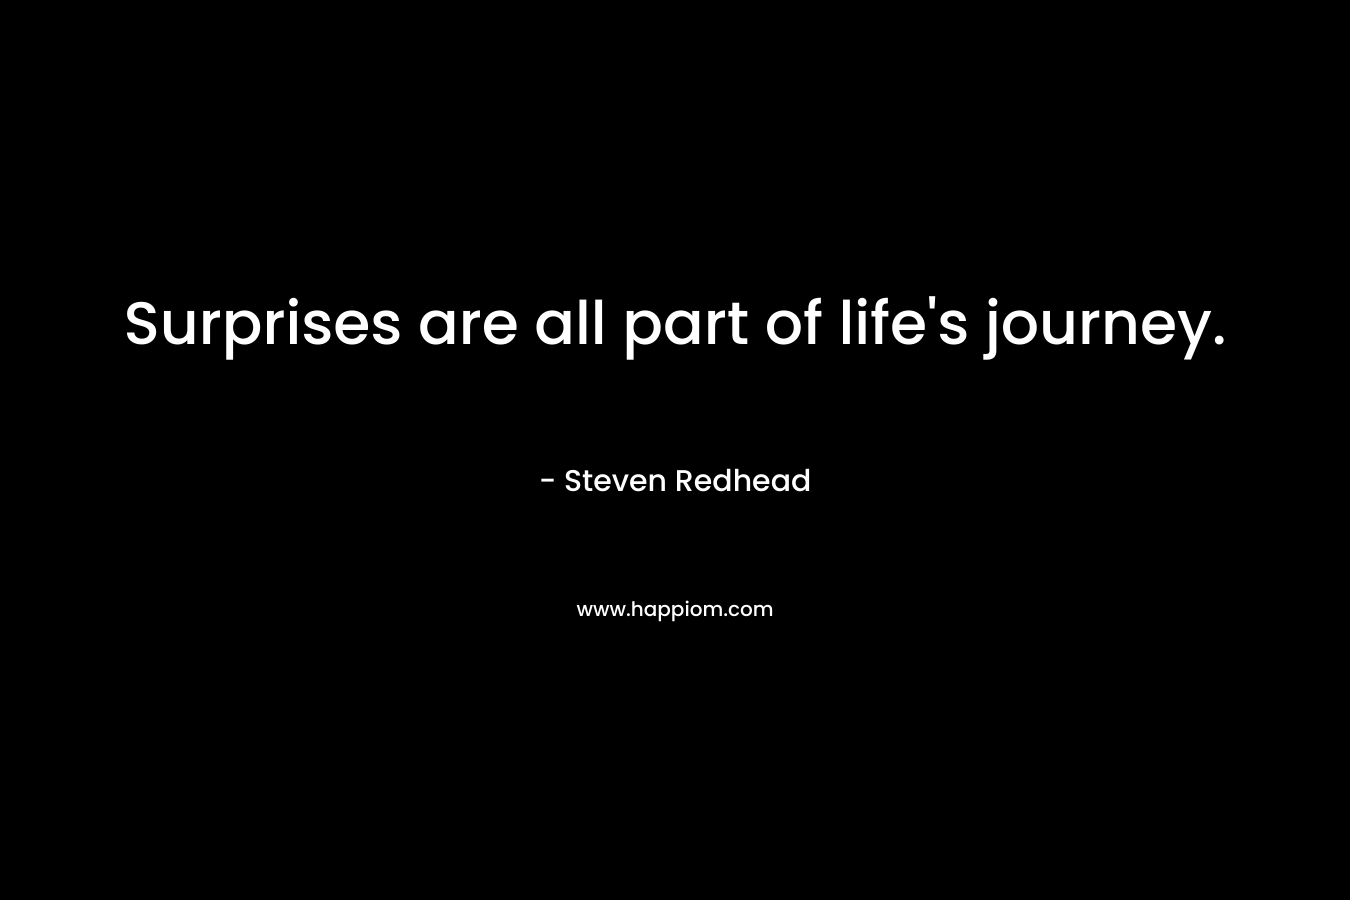 Surprises are all part of life's journey.